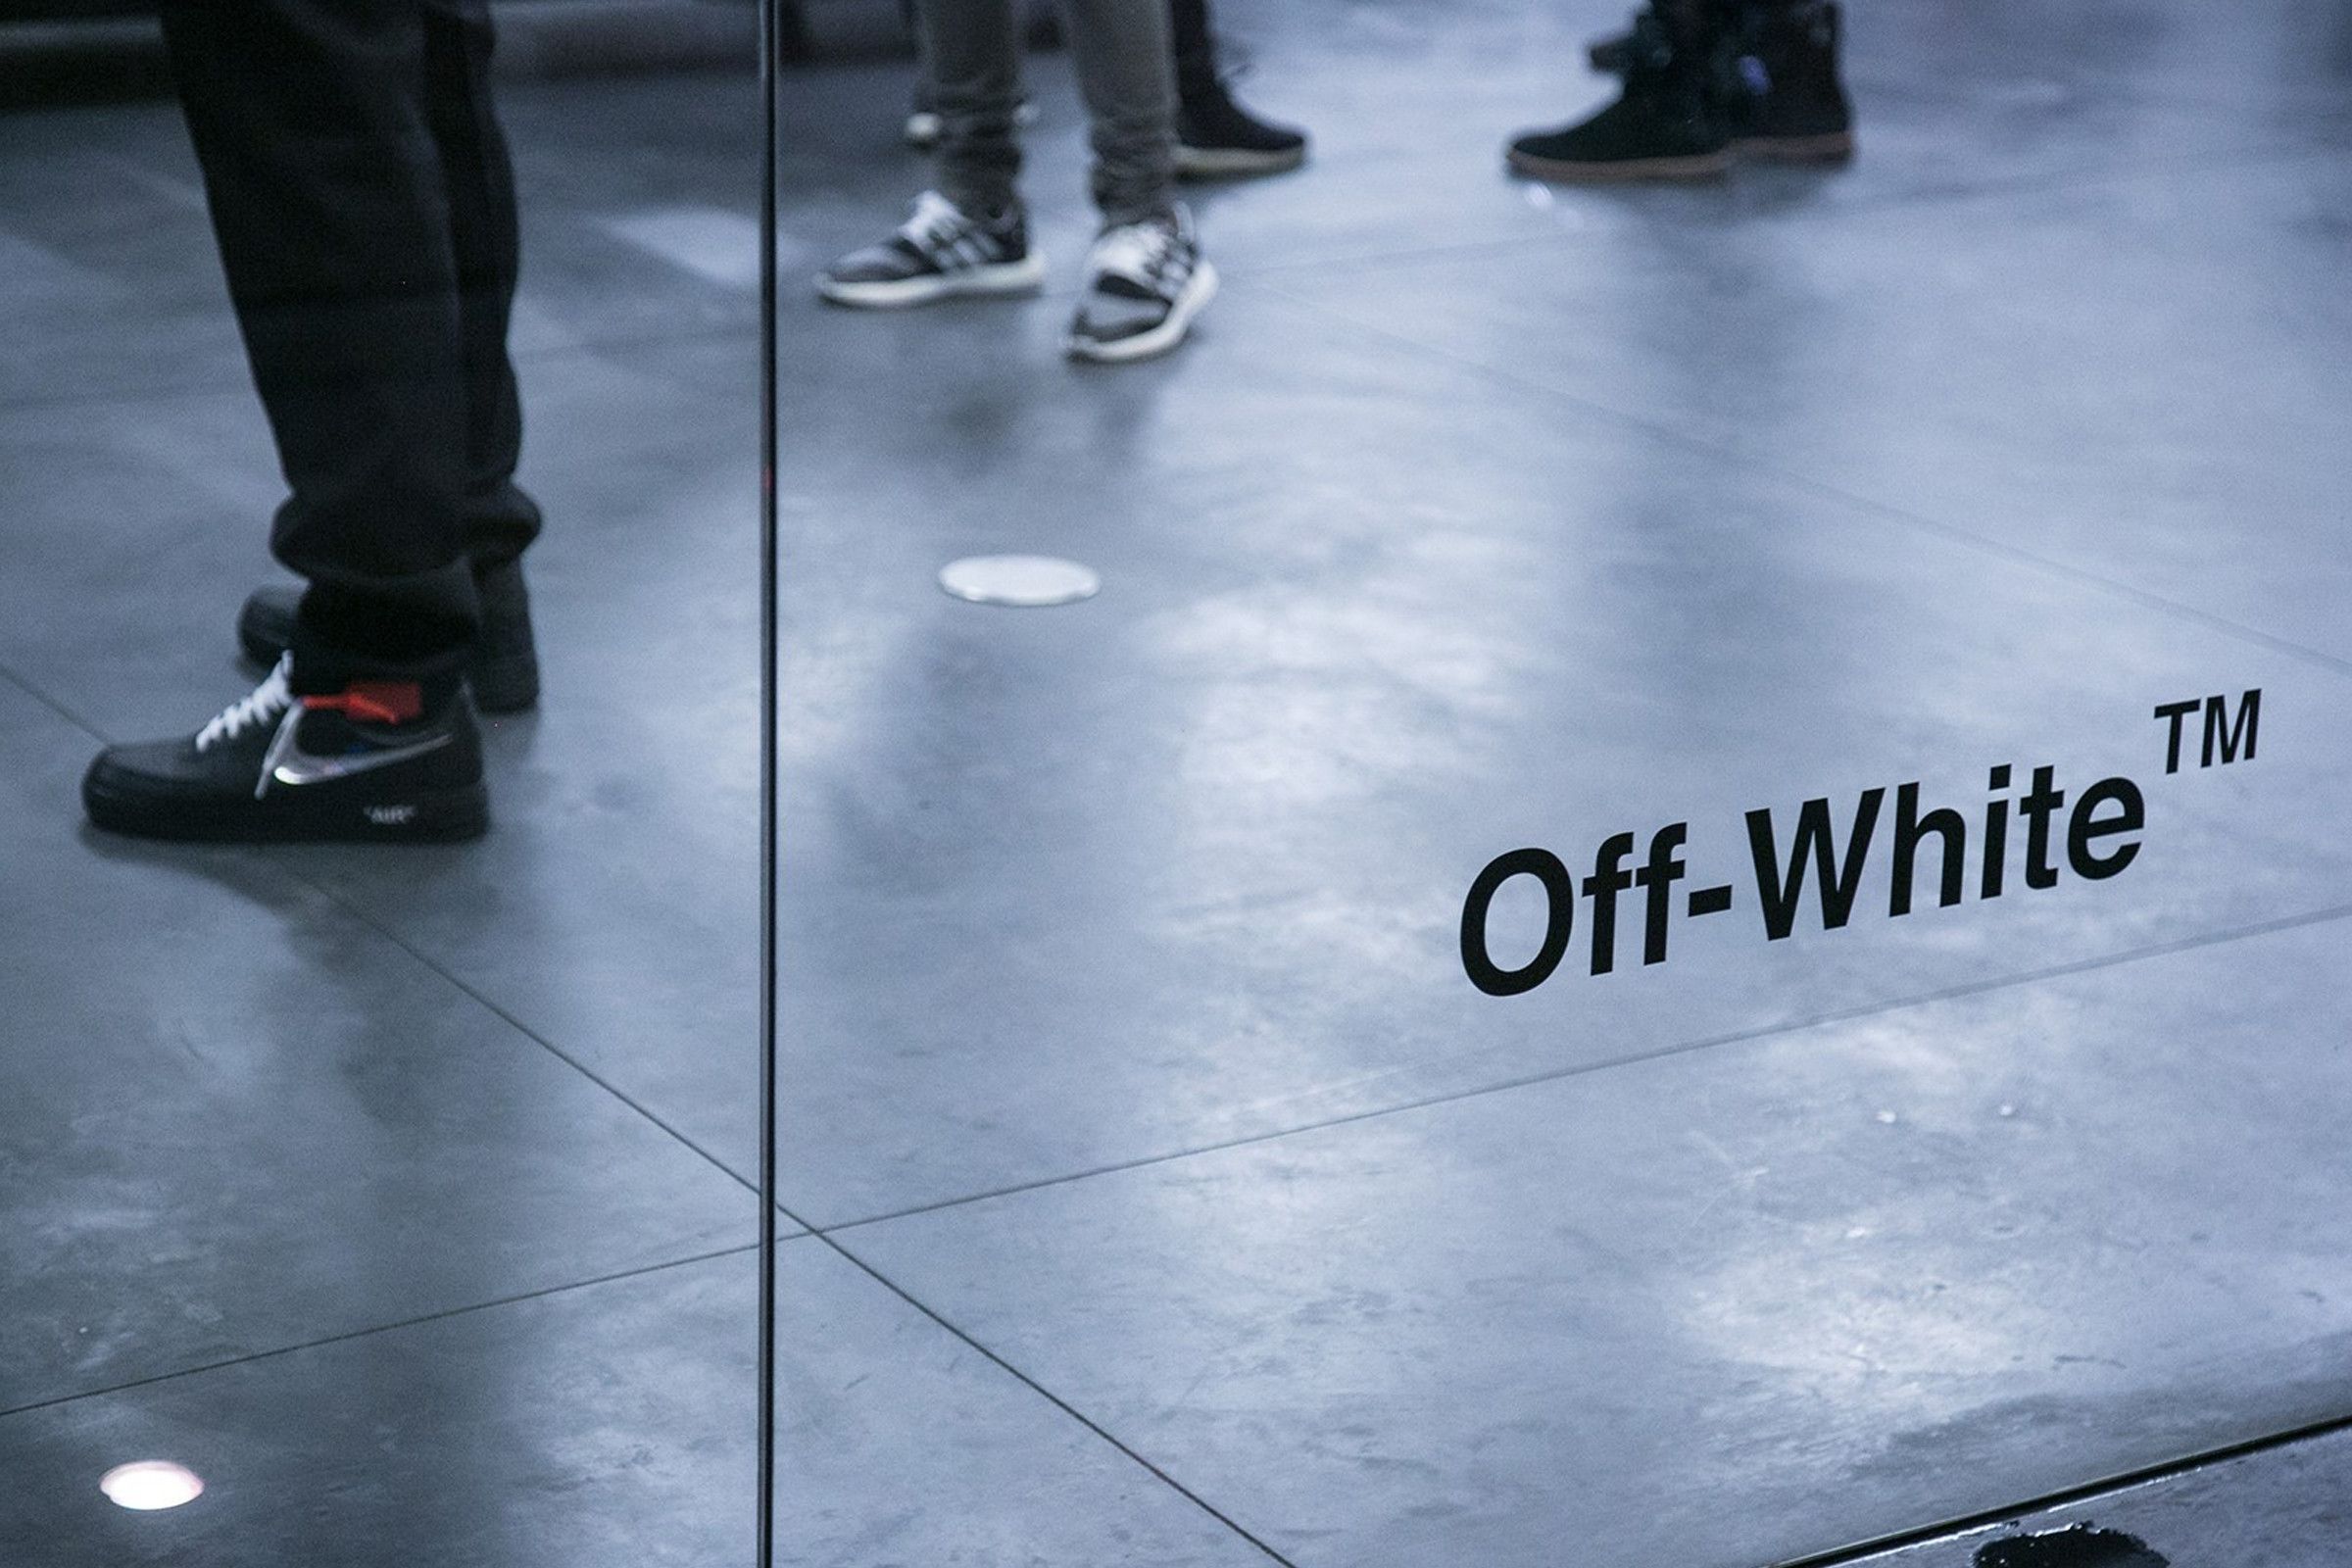 How Off-White shaped fashion culture